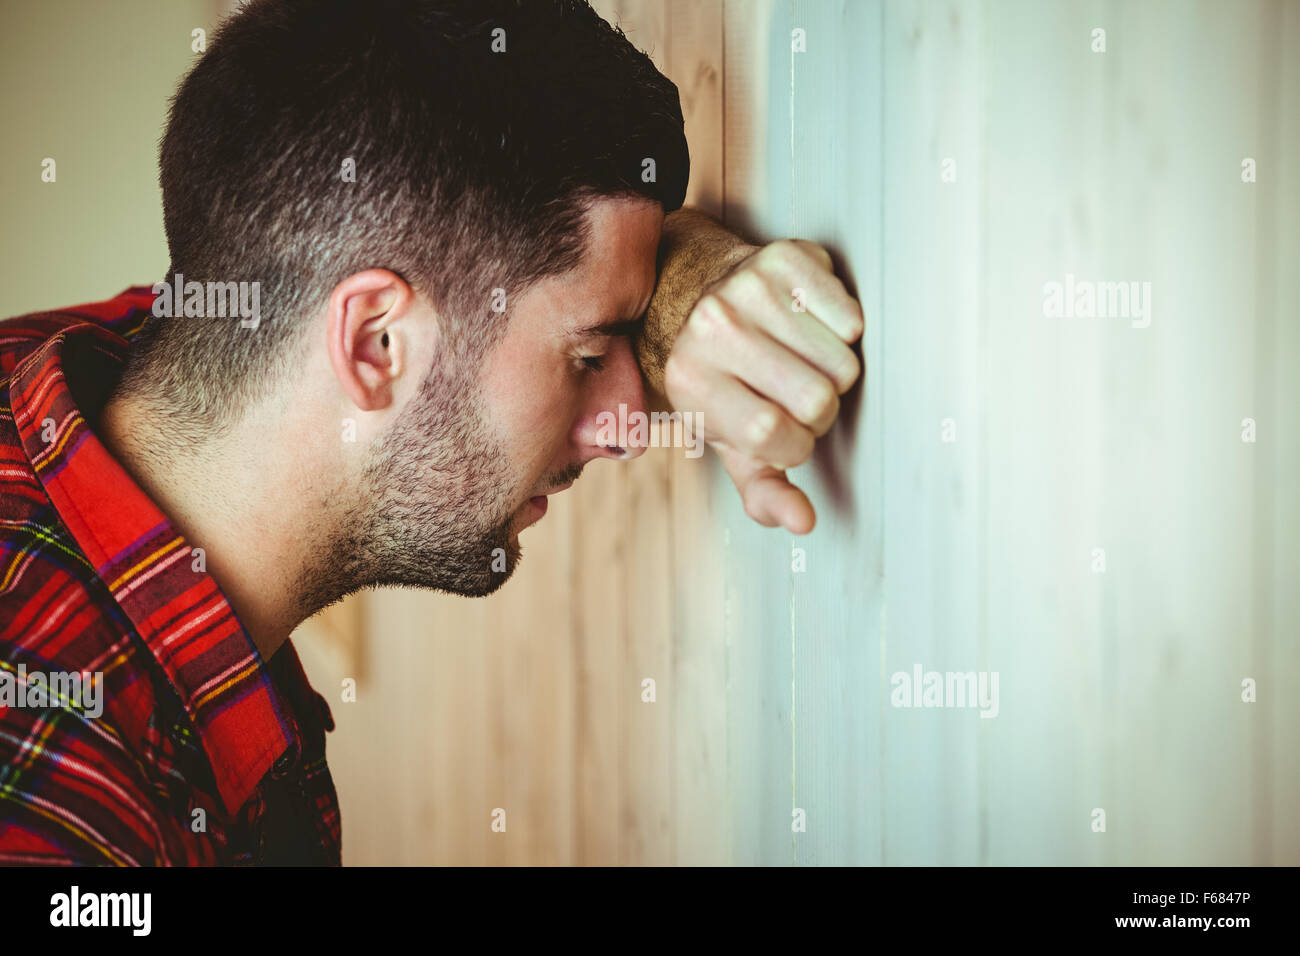 Stressed man leaning against wall Stock Photo